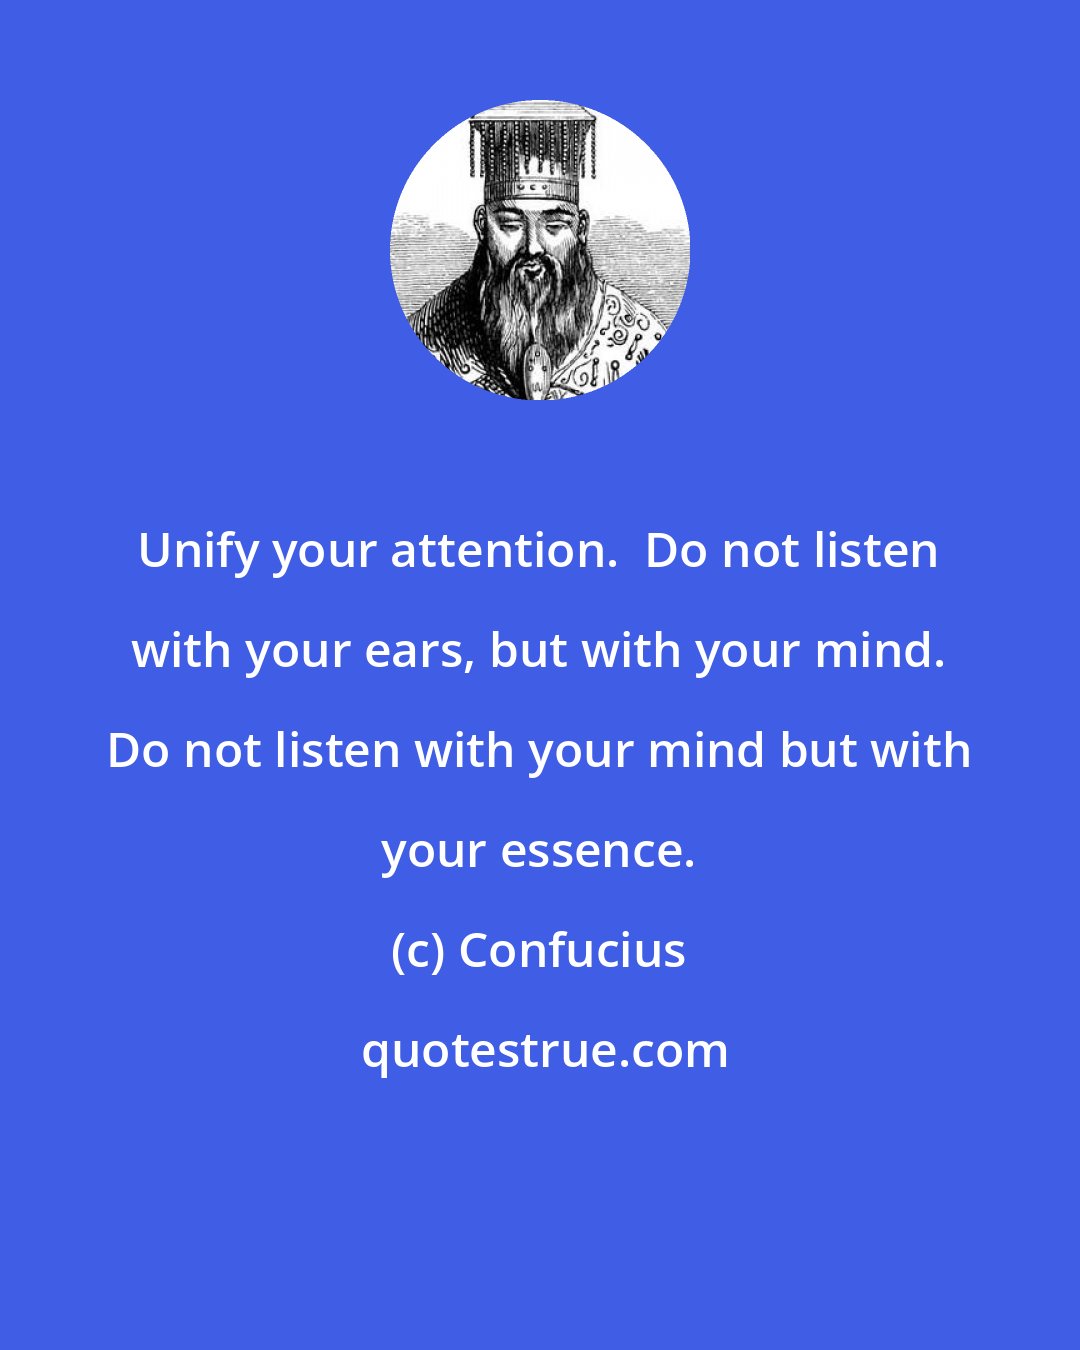 Confucius: Unify your attention.  Do not listen with your ears, but with your mind. Do not listen with your mind but with your essence.